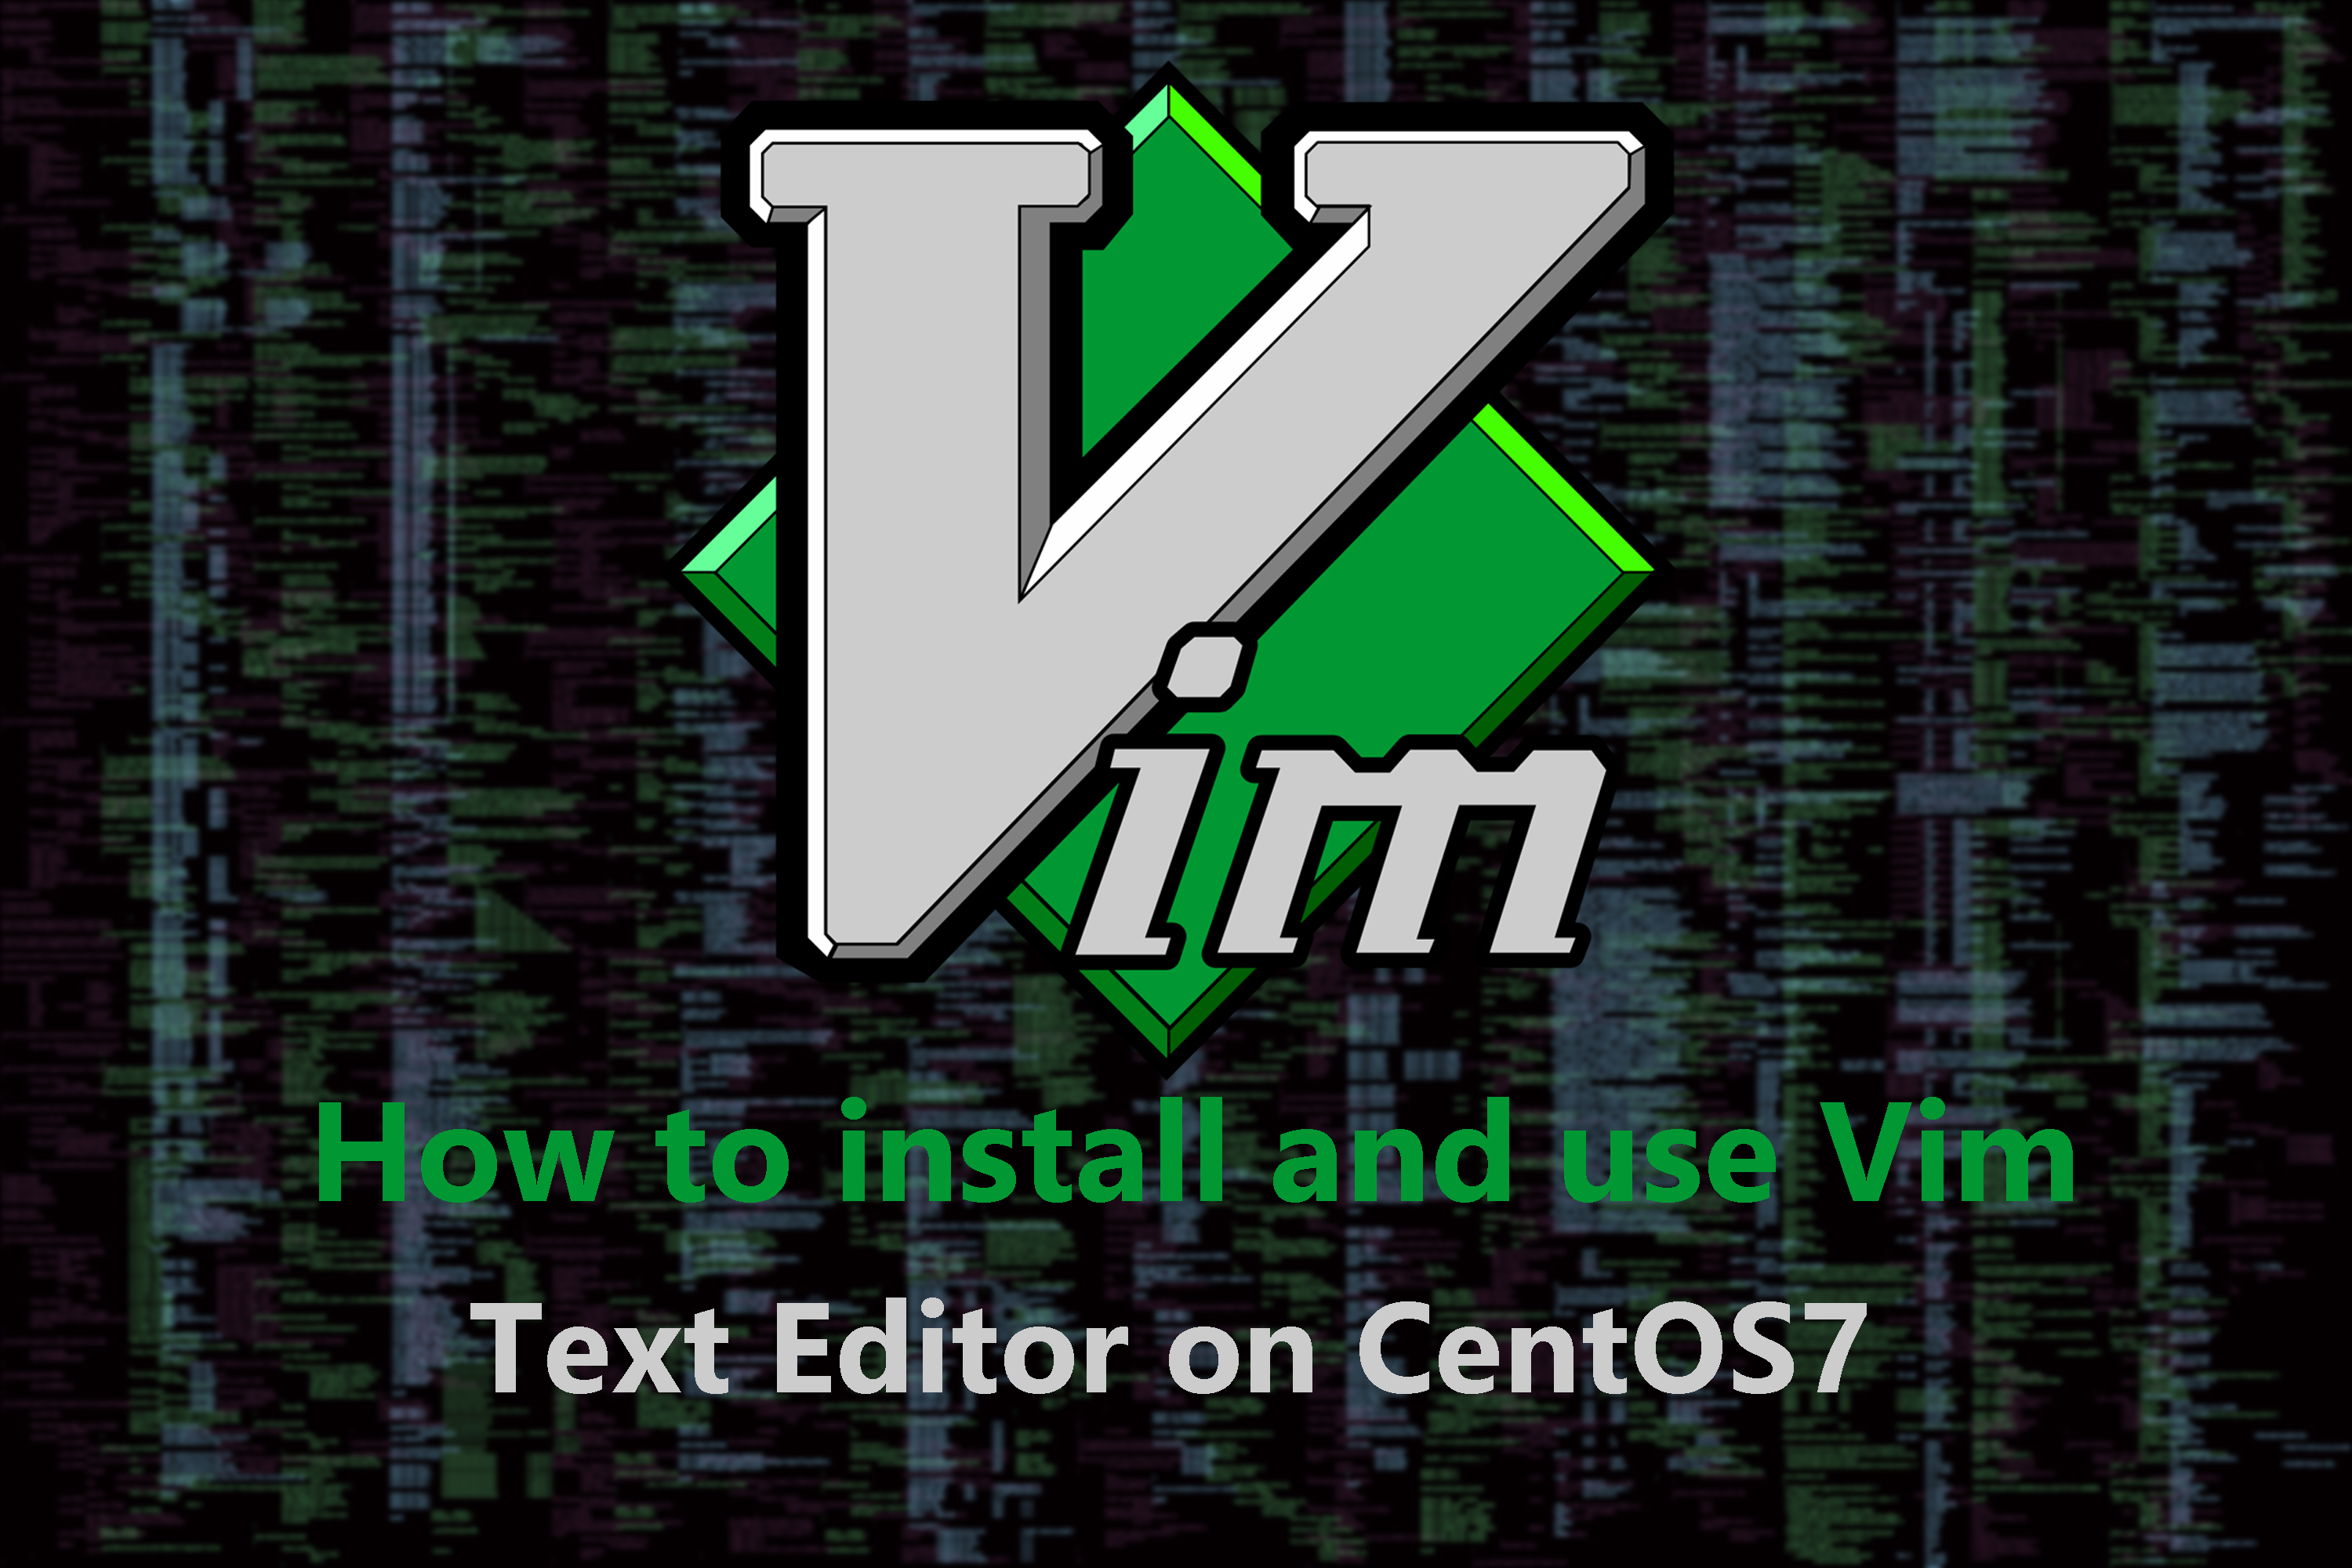 How to install and use Vim text editor on CentOS7